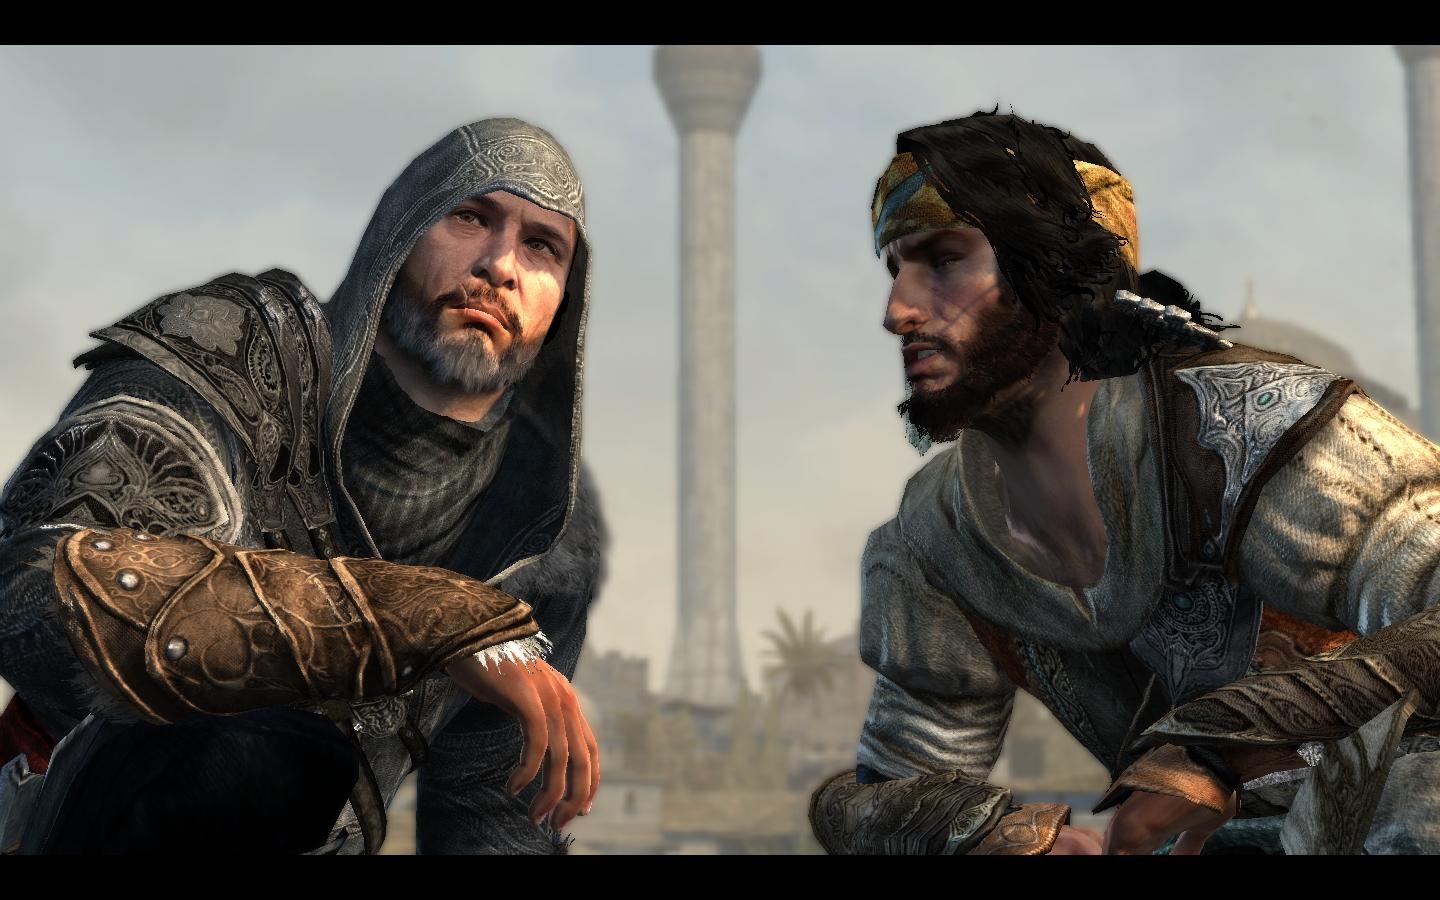 Assassin's Creed: Revelations Review - GameSpot